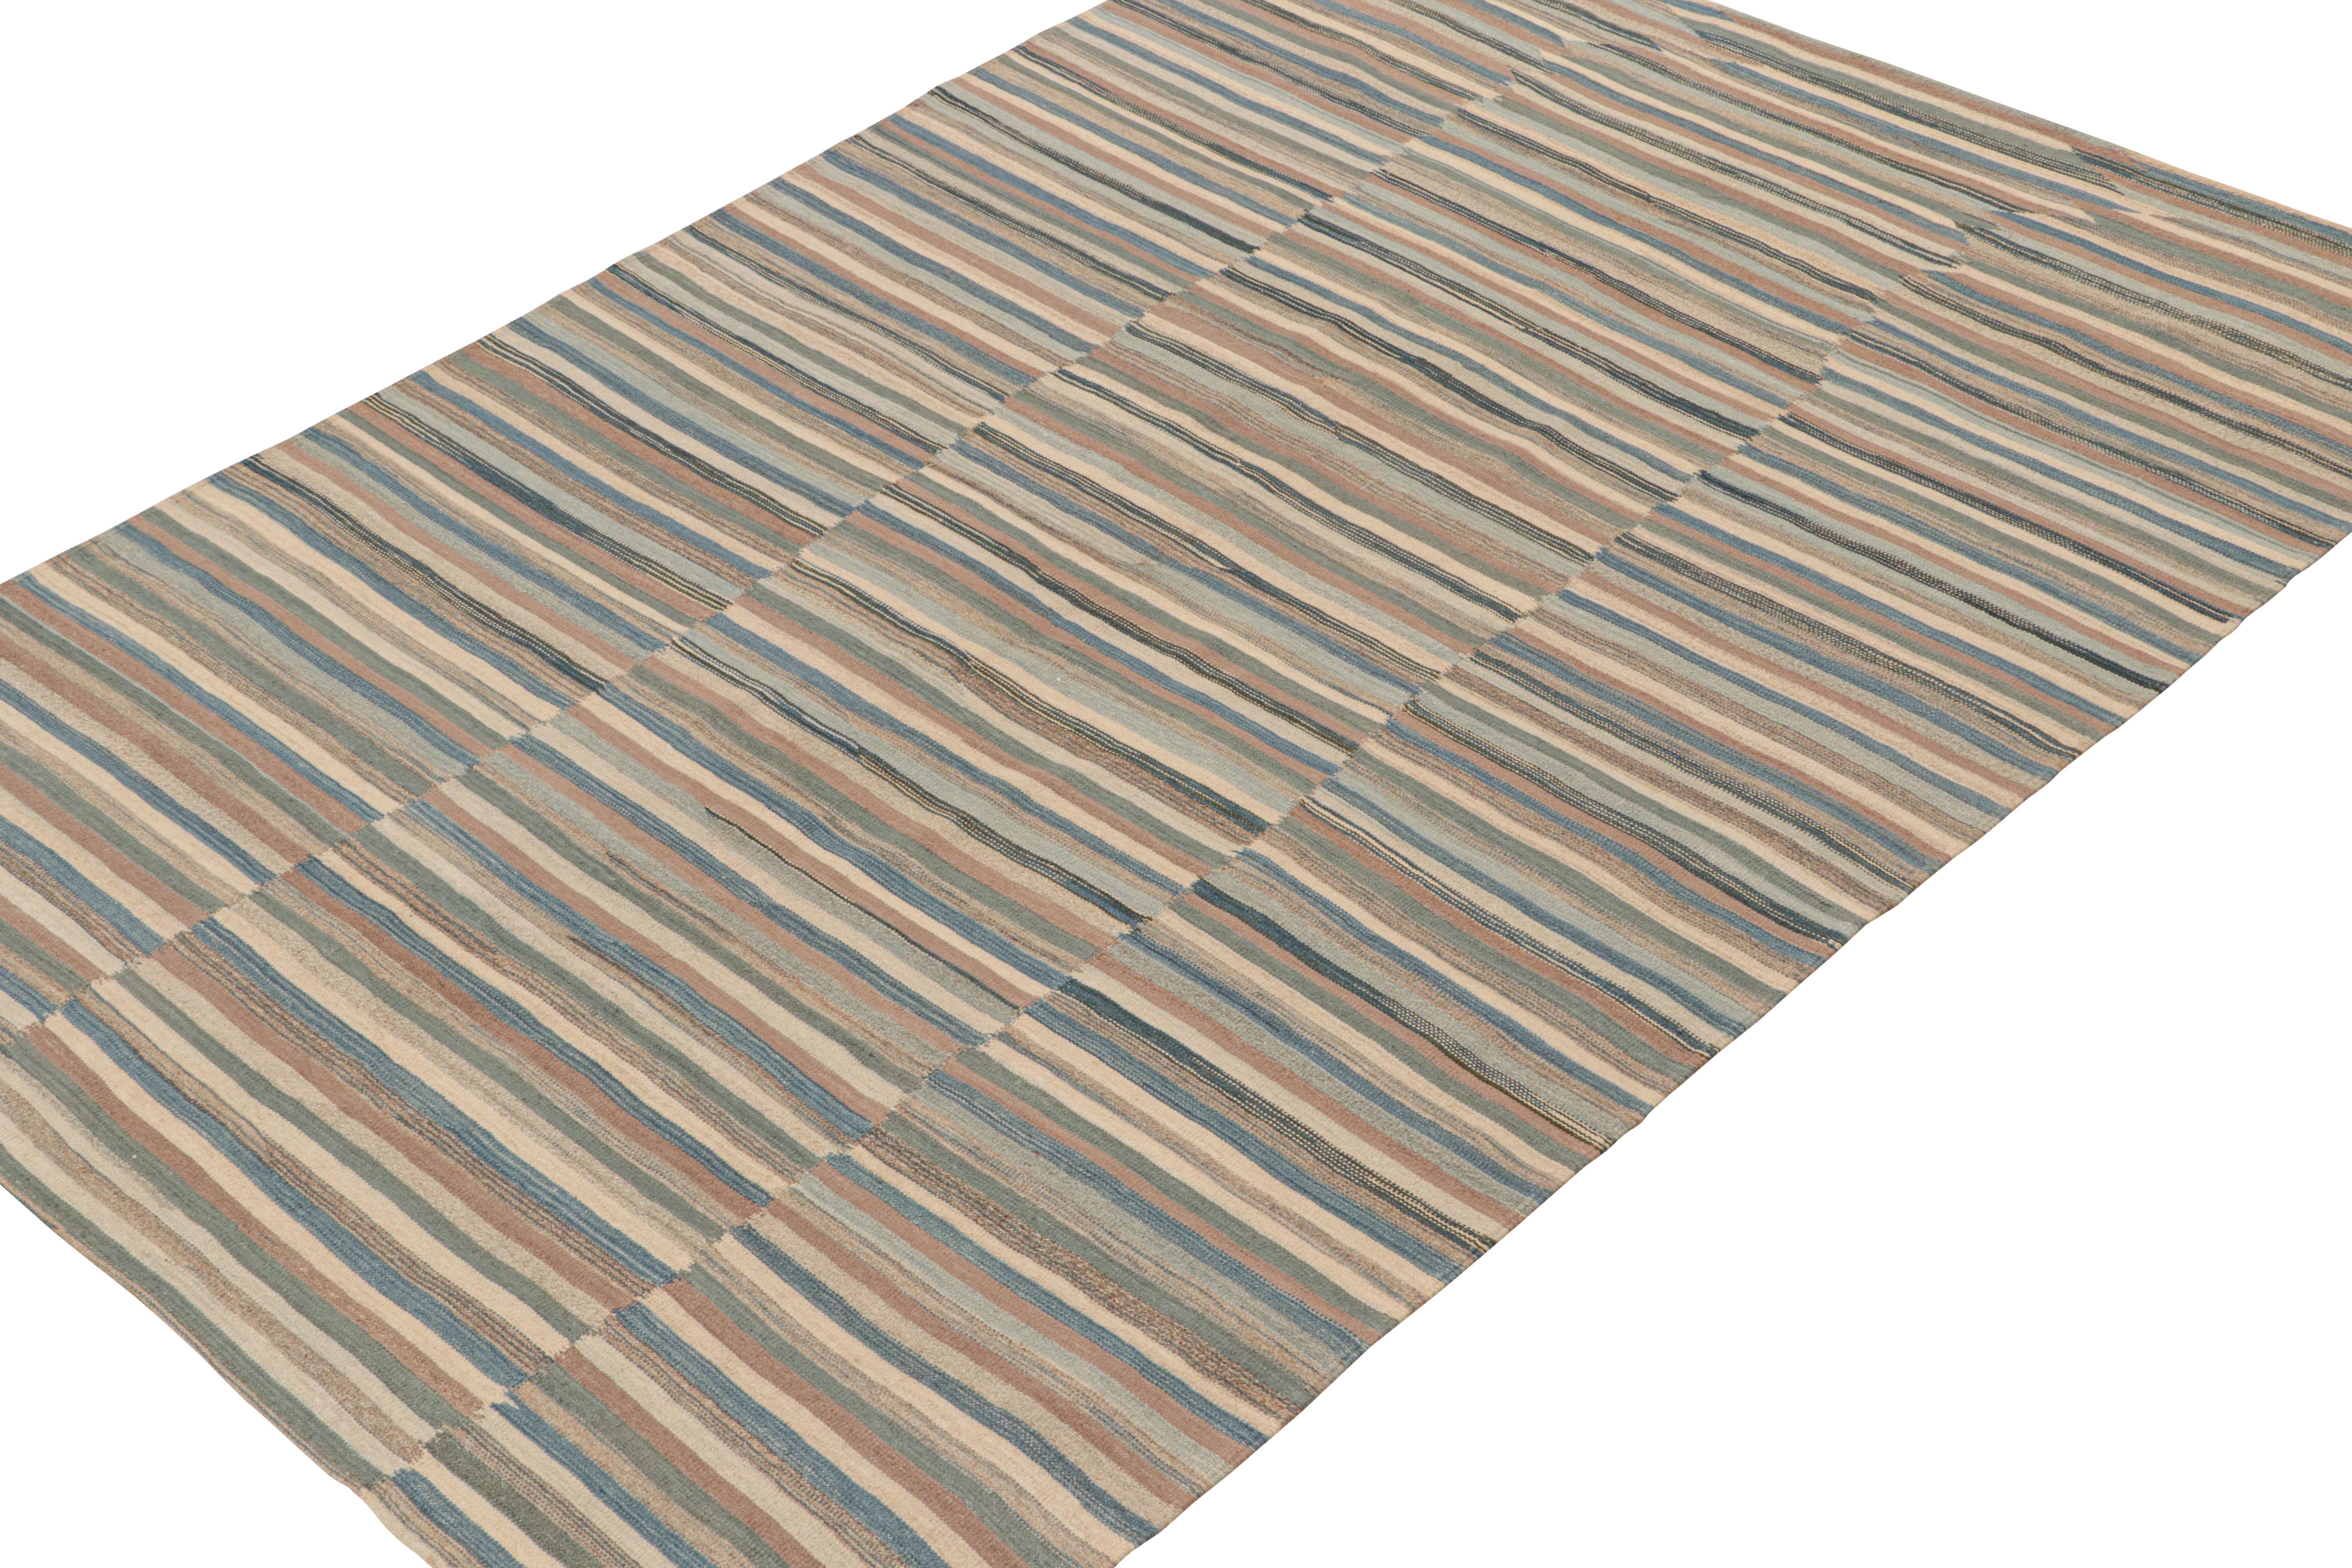 Tribal Vintage Persian Kilim with Panels in Beige-Brown and Blue Stripes by Rug & Kilim For Sale